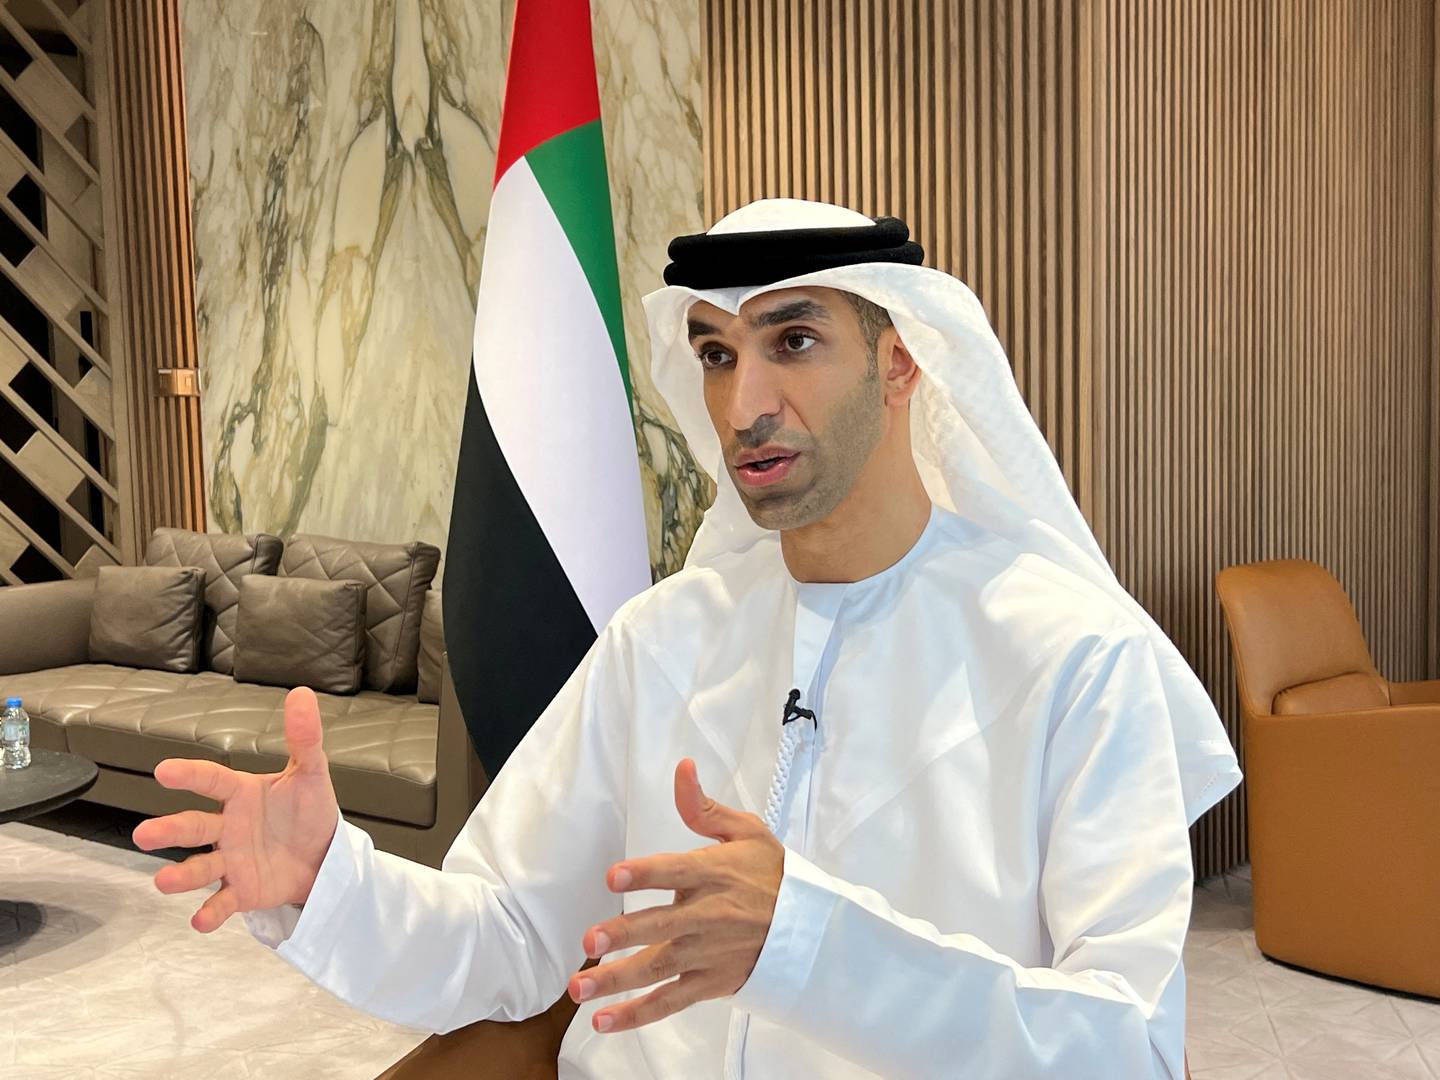 Dr Thani Al Zeyoudi, Minister of State for Foreign Trade, says the UAE will continue to pursue trade deals with key global partners. Reuters